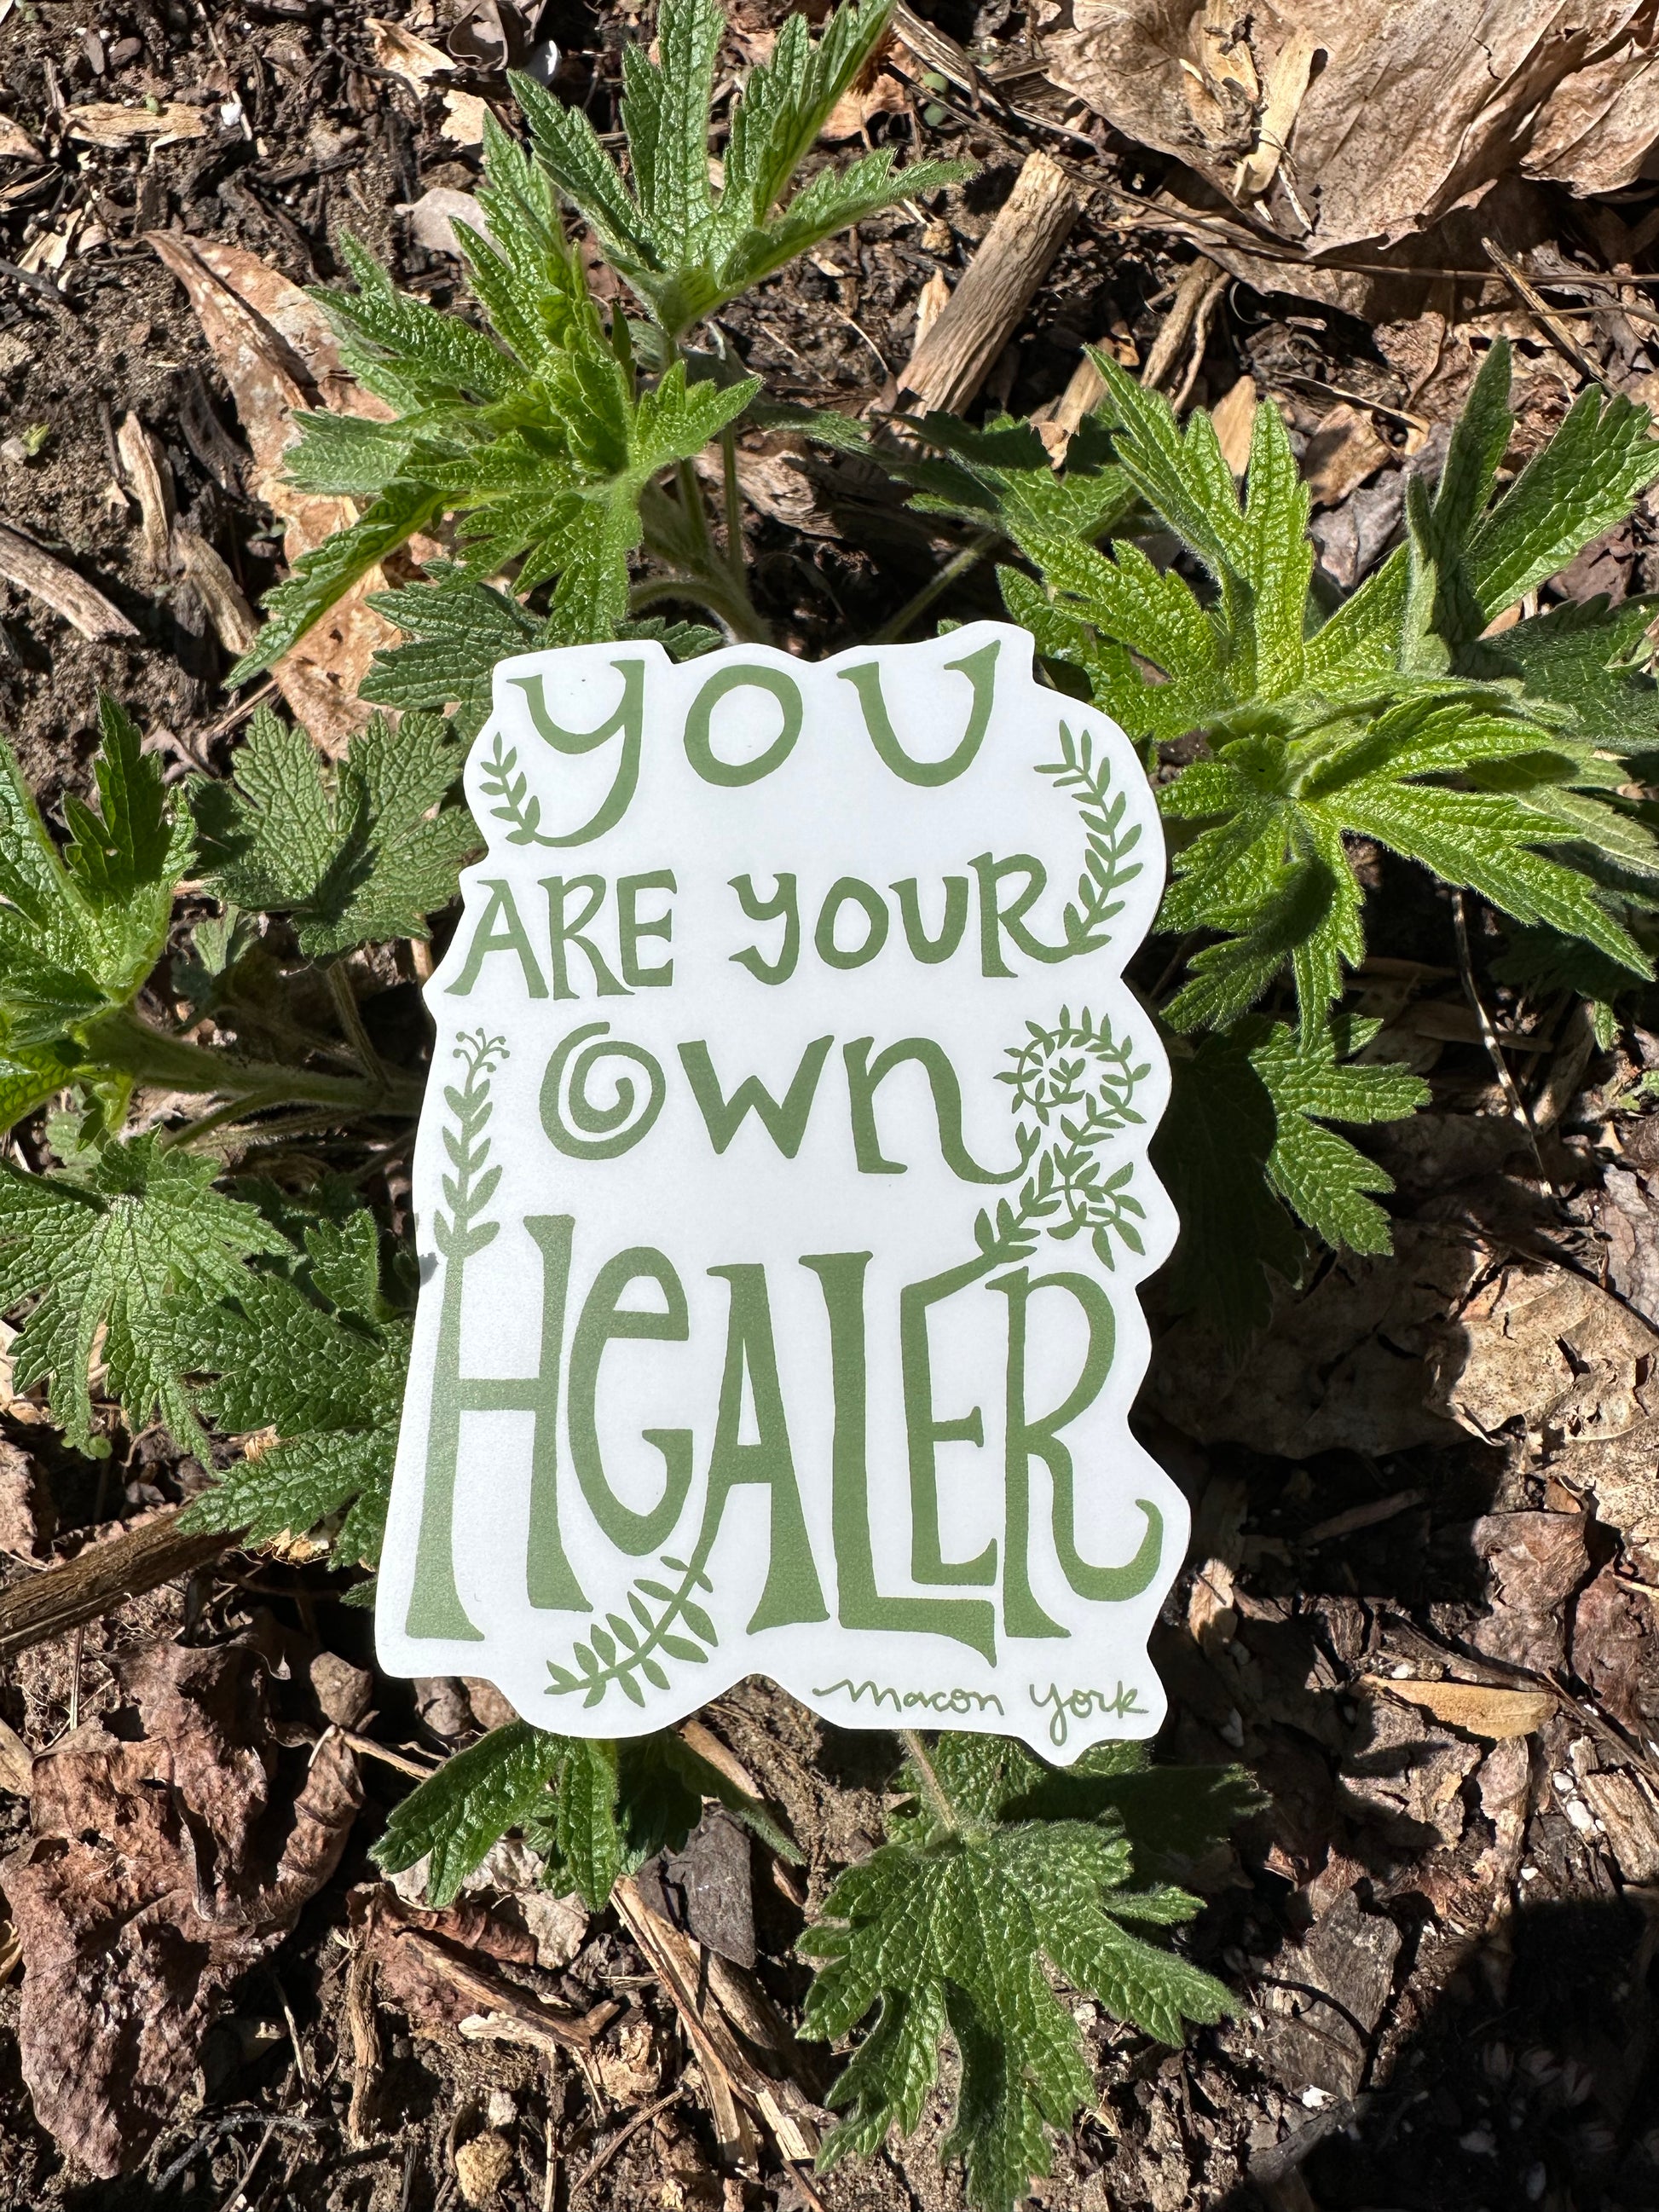 High quality vinyl sticker featuring original hand-drawn typography by Macon York that reads "you are your own hearler" in a funky, earthy, 70s style. 3" x 4".  Sticker is shown on new growth motherwort.